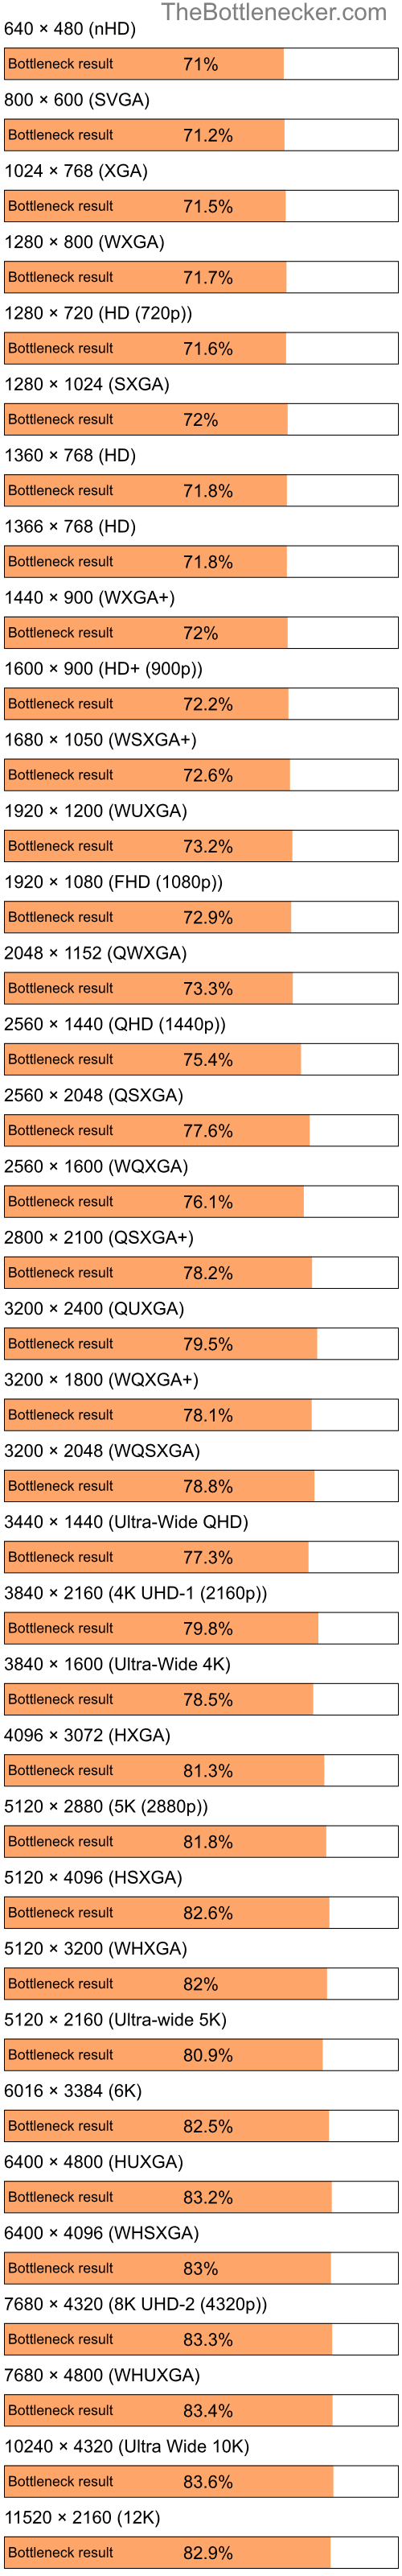 Bottleneck results by resolution for Intel Pentium 4 and NVIDIA GeForce 9400 in Graphic Card Intense Tasks